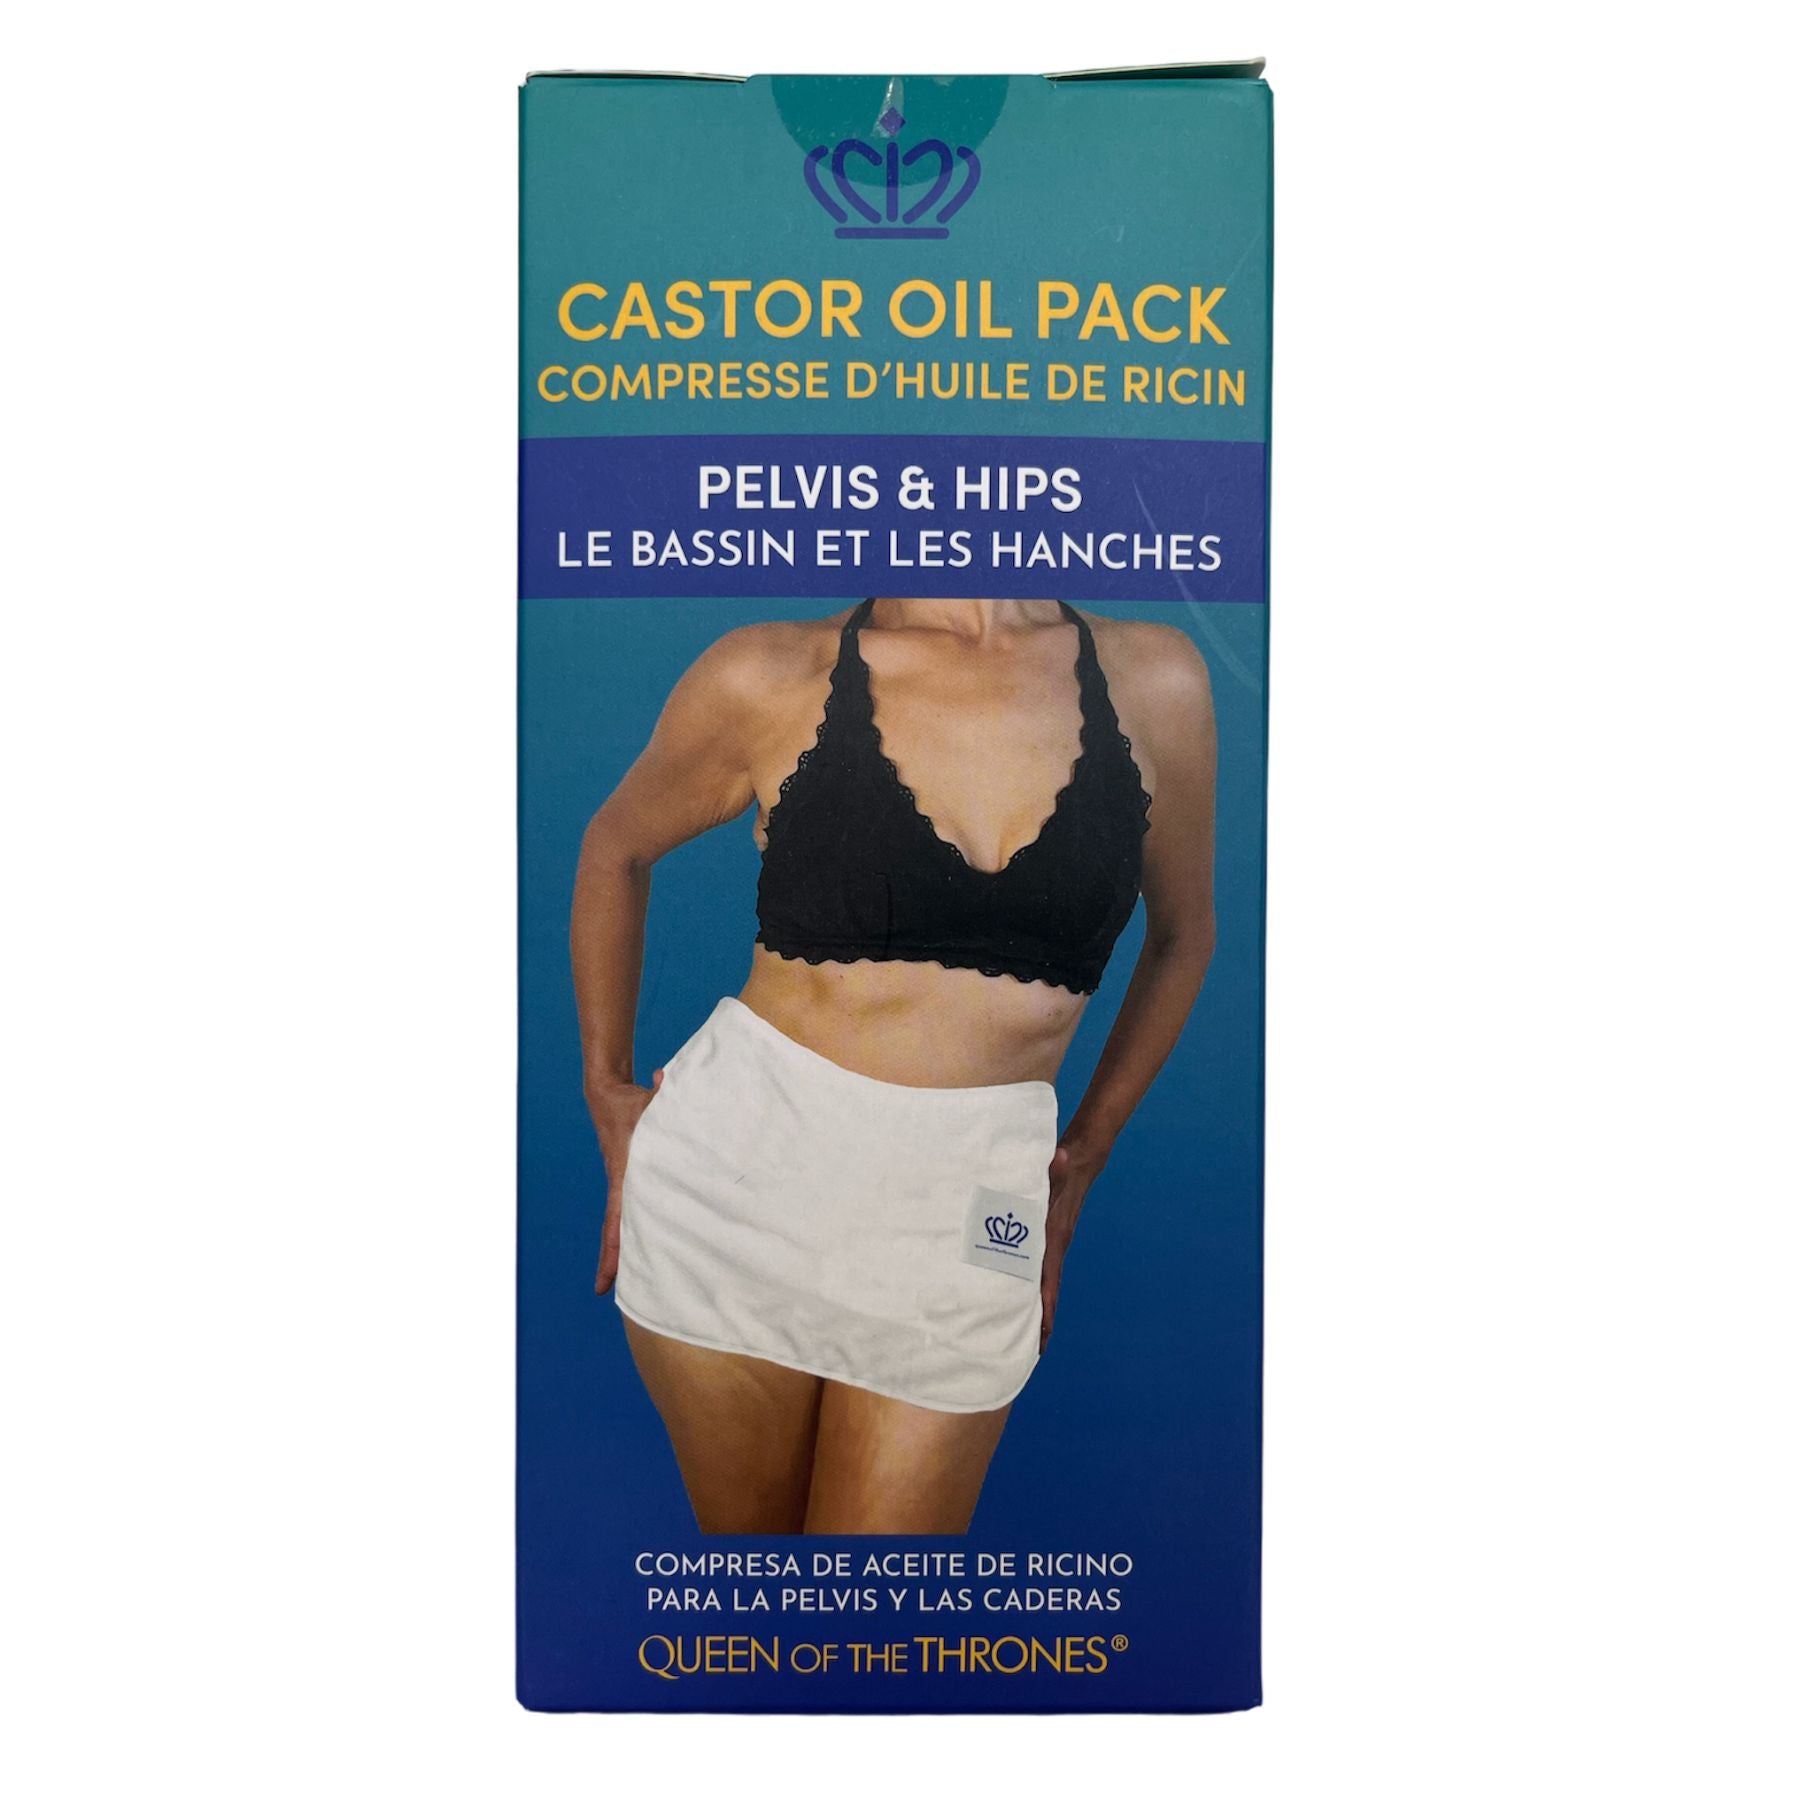 Queen of the Thrones Castor Oil Pack for Pelvis and Hips. Compress only, castor oil sold separately.